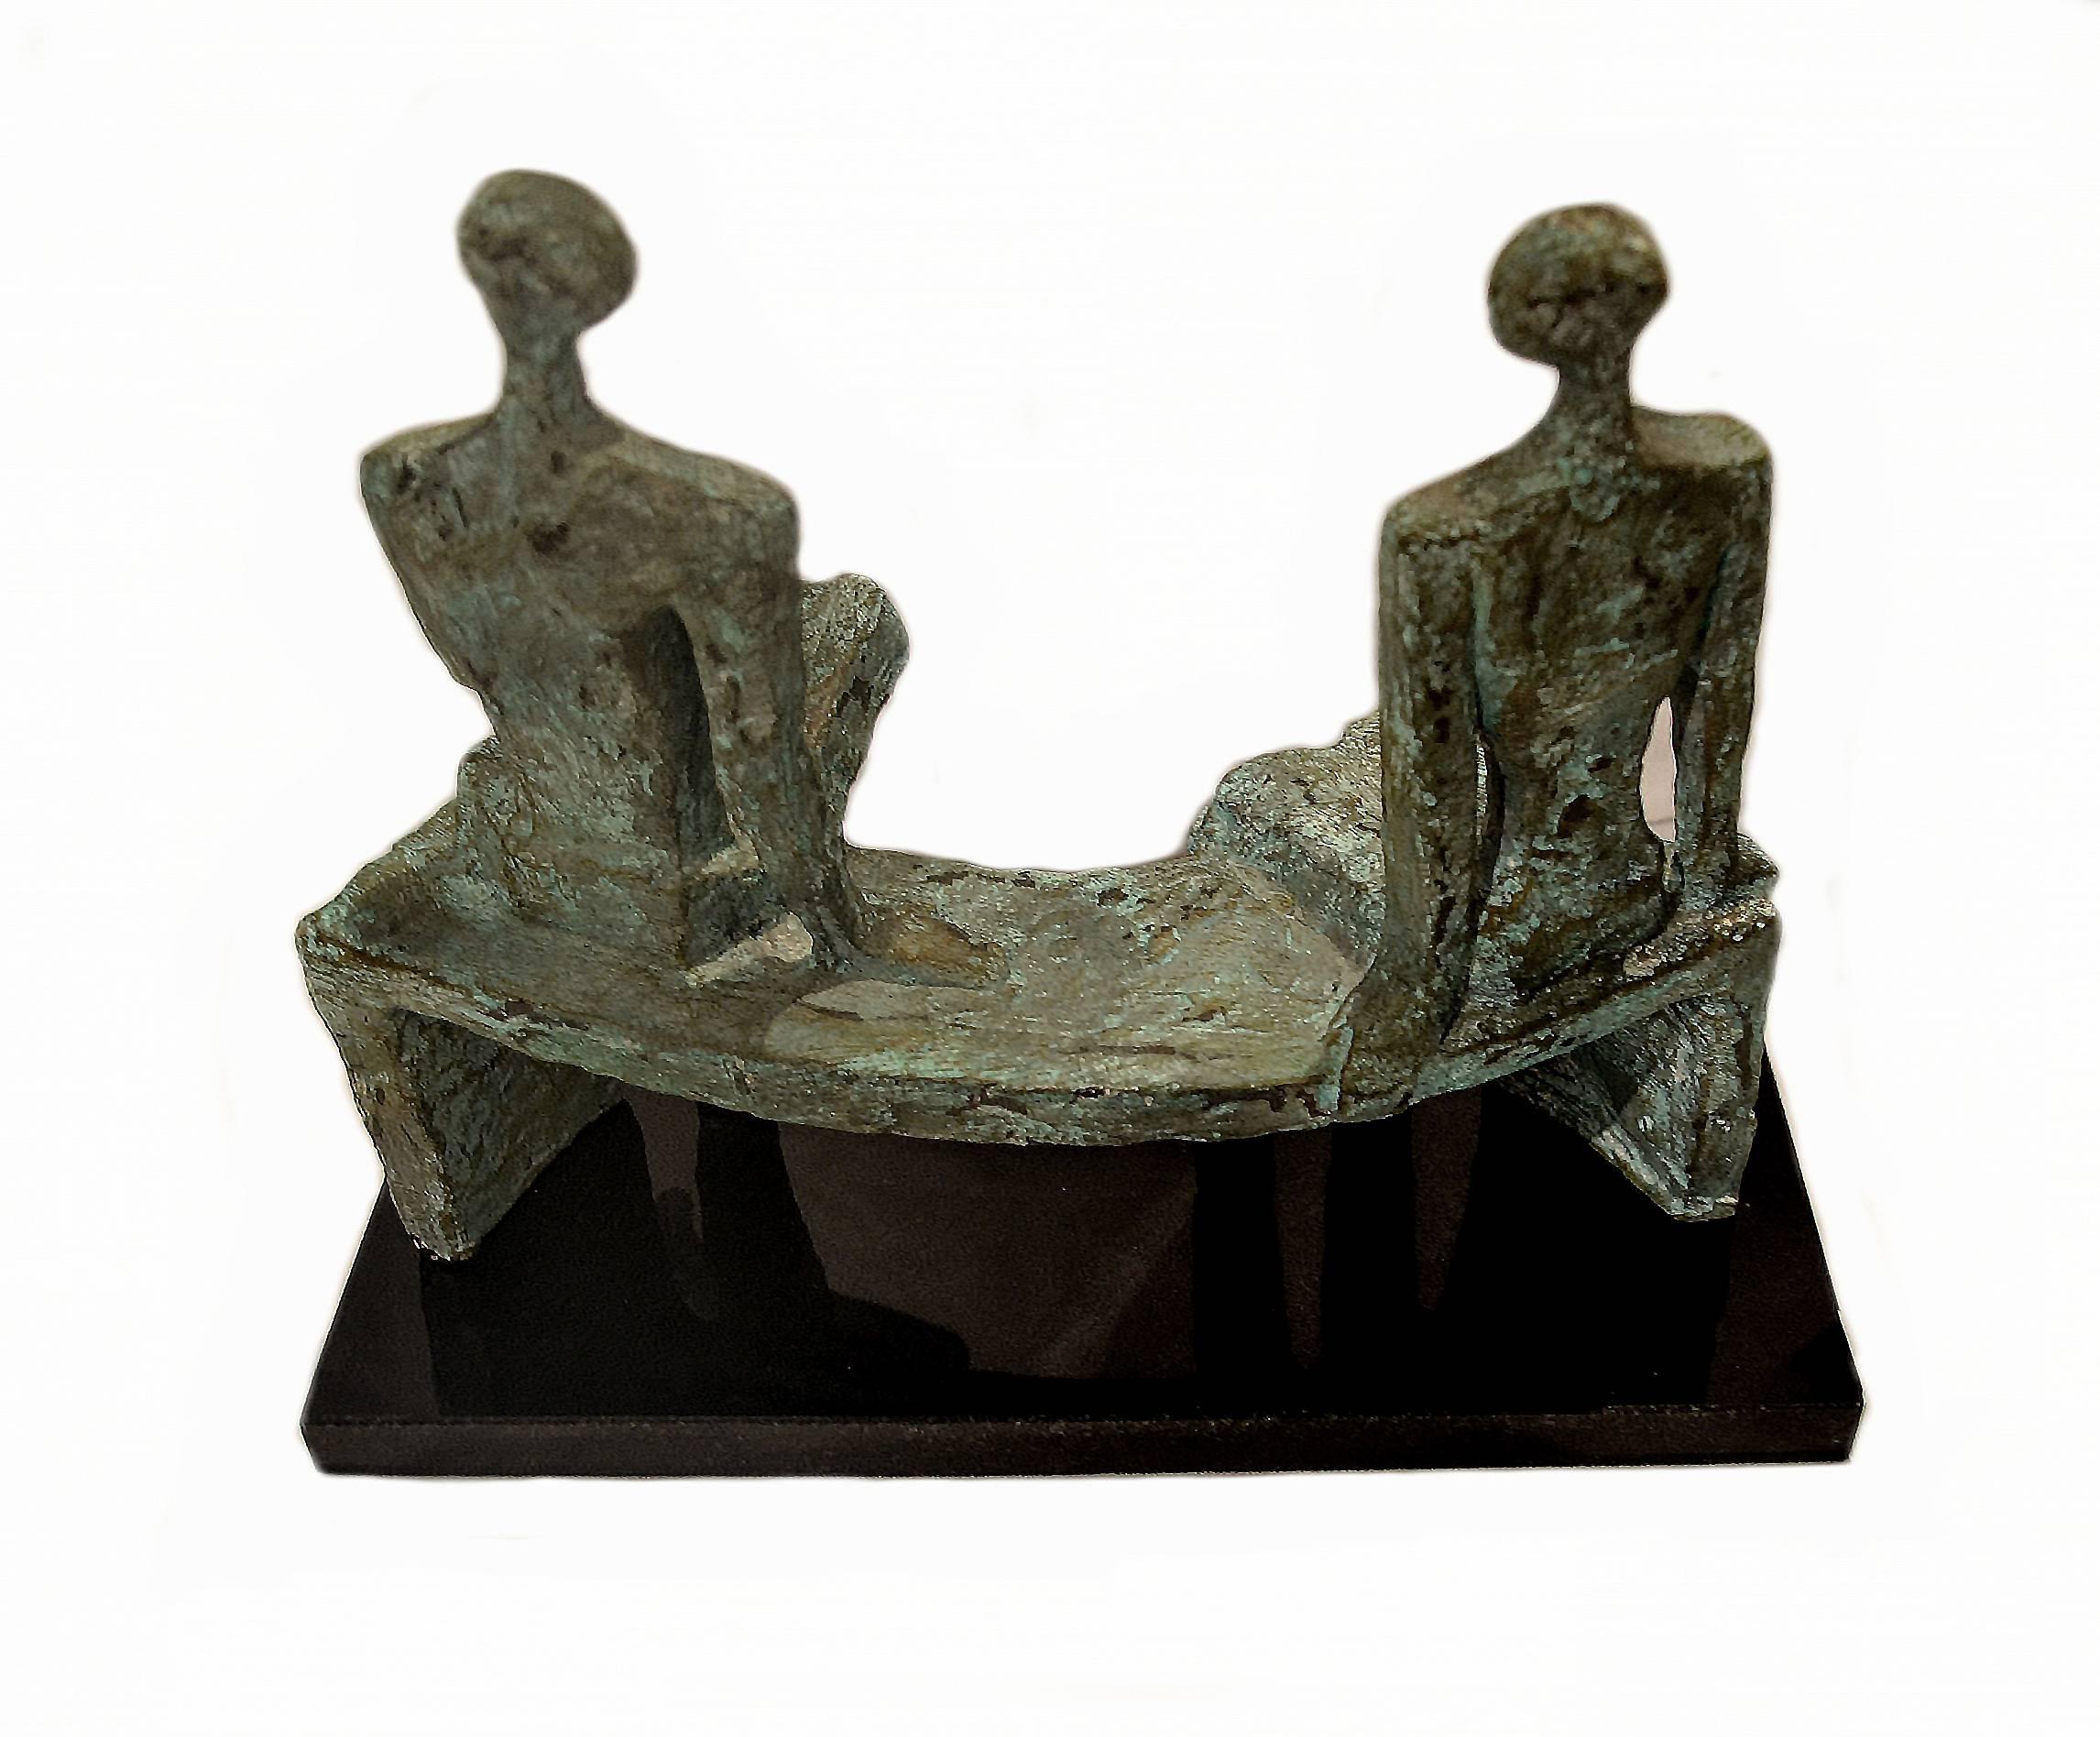 Exceptional vintage bronze sculpture after Henry Moore. Featuring two figures seated on a bench and mounted on a black marble base.
 